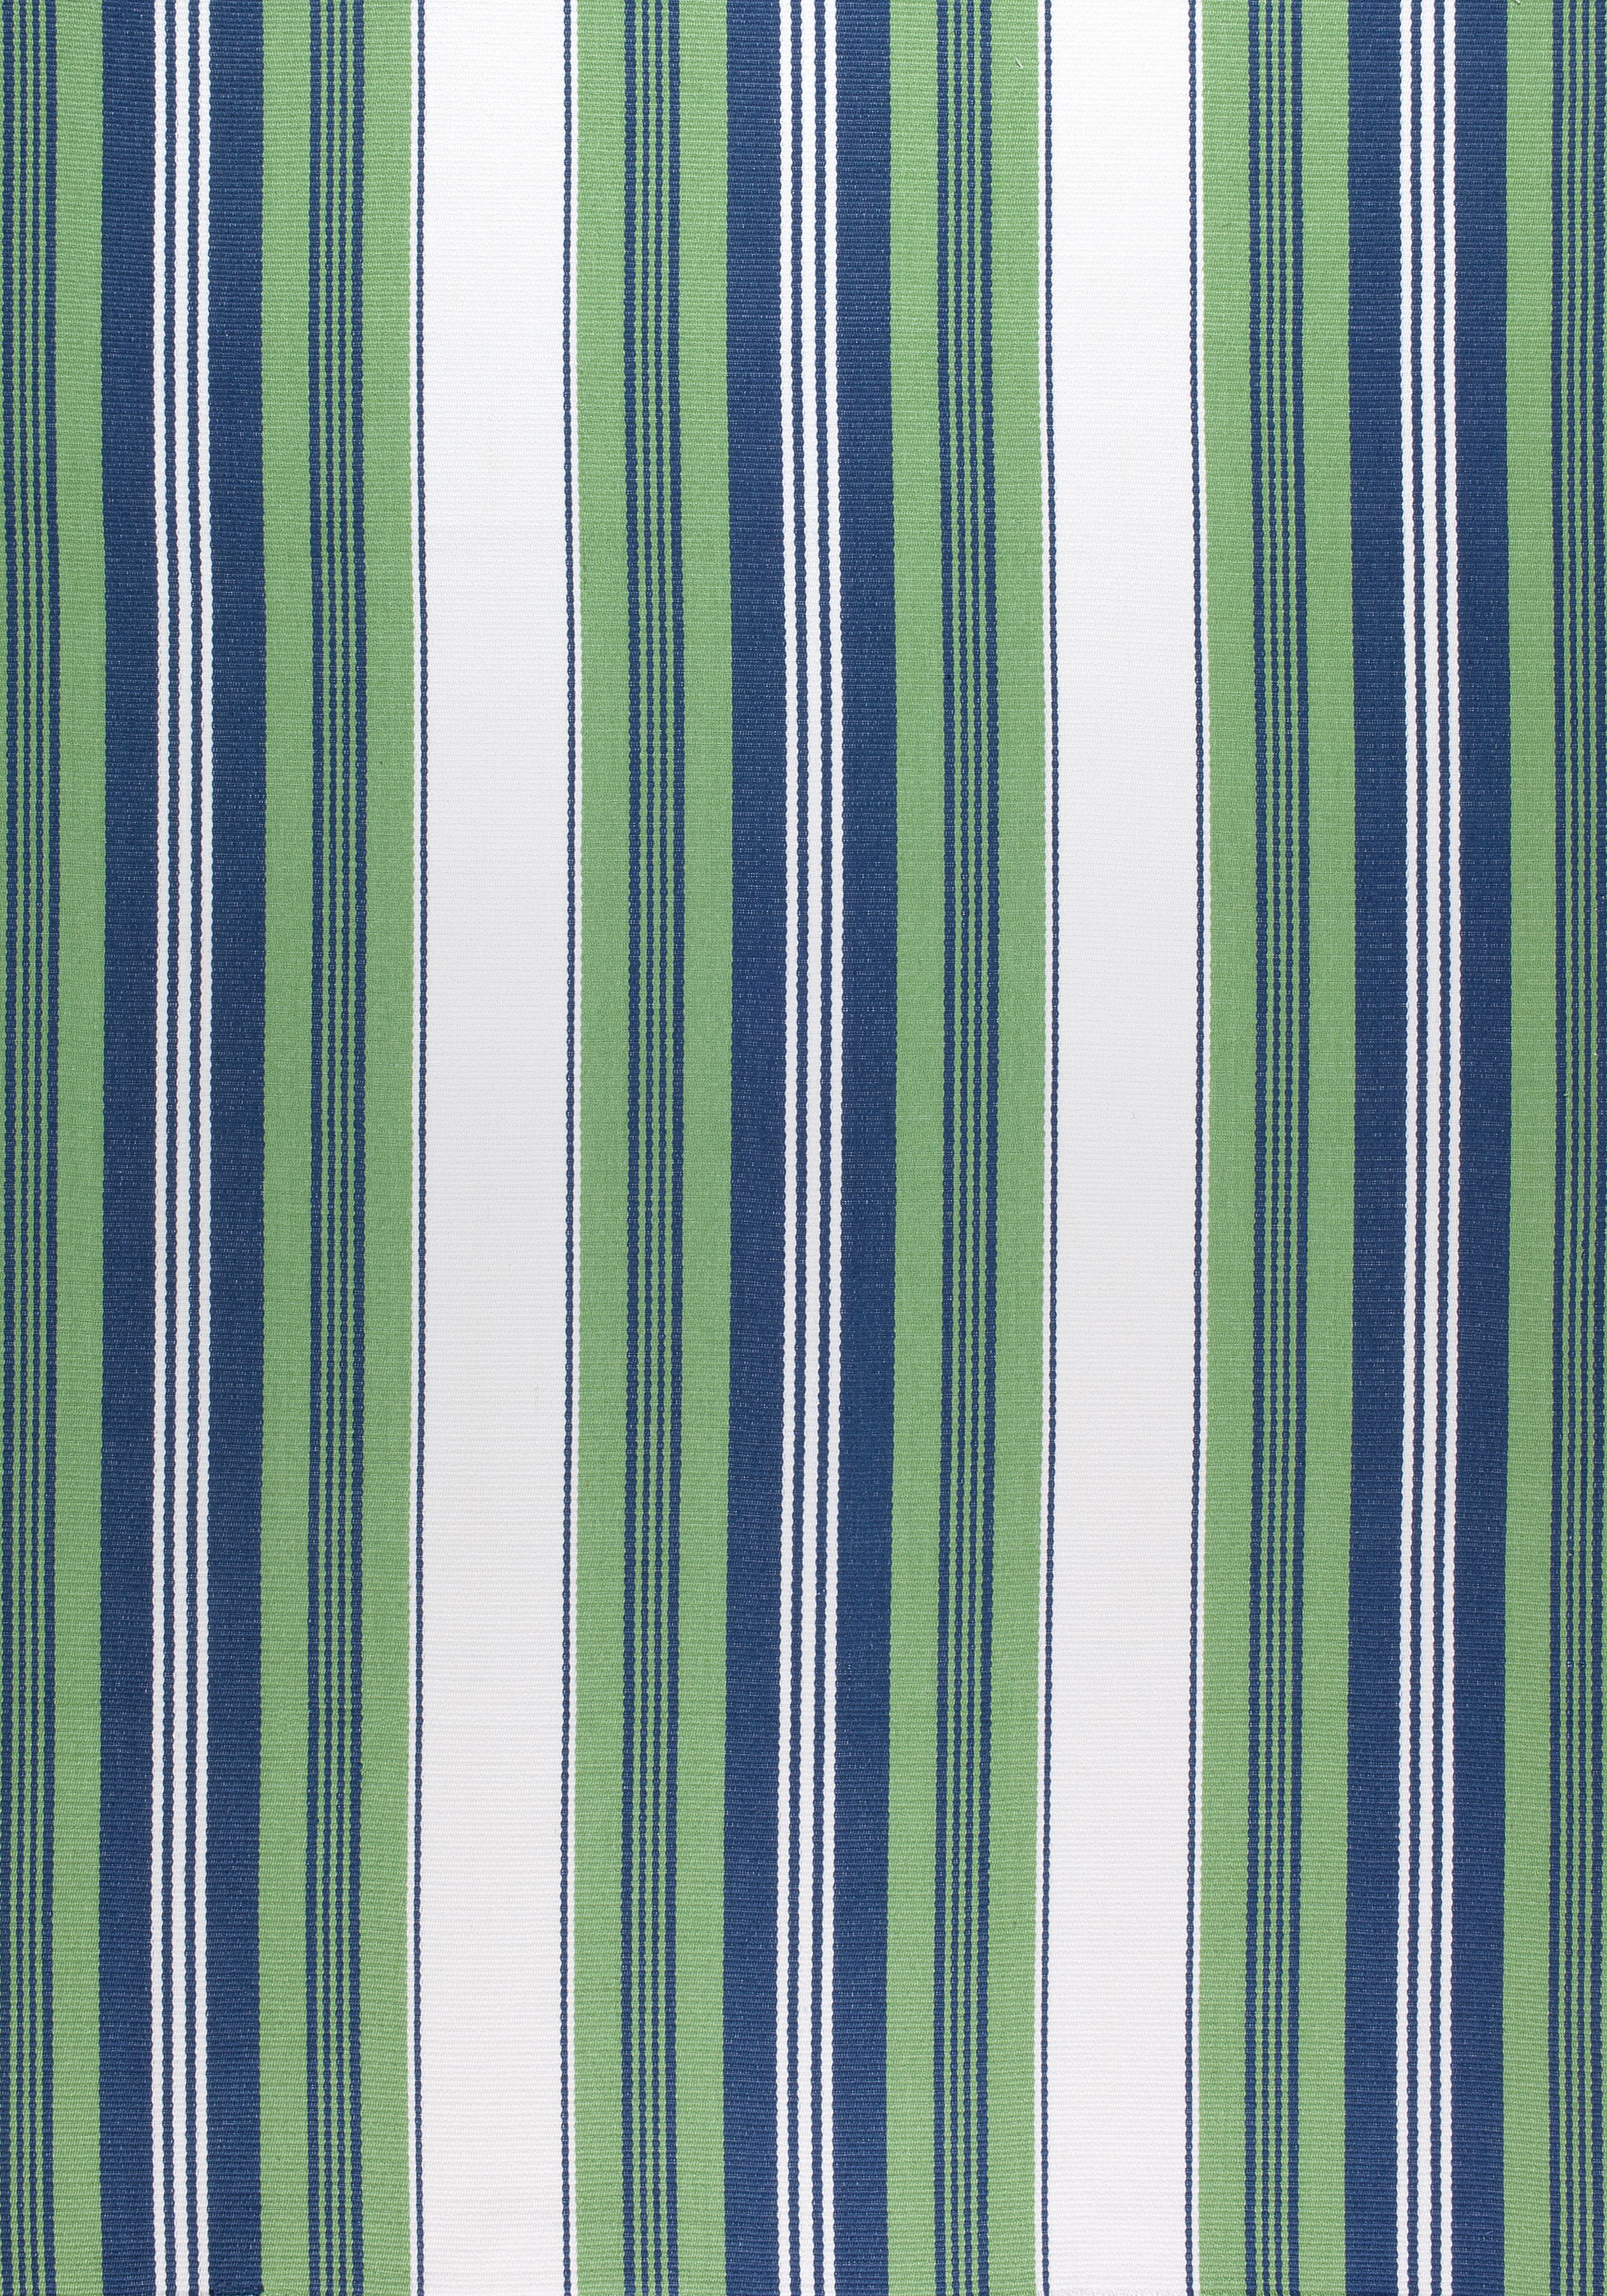 SHERIDAN STRIPE Blue and Green W80071 Collection Woven 9 2520x3600